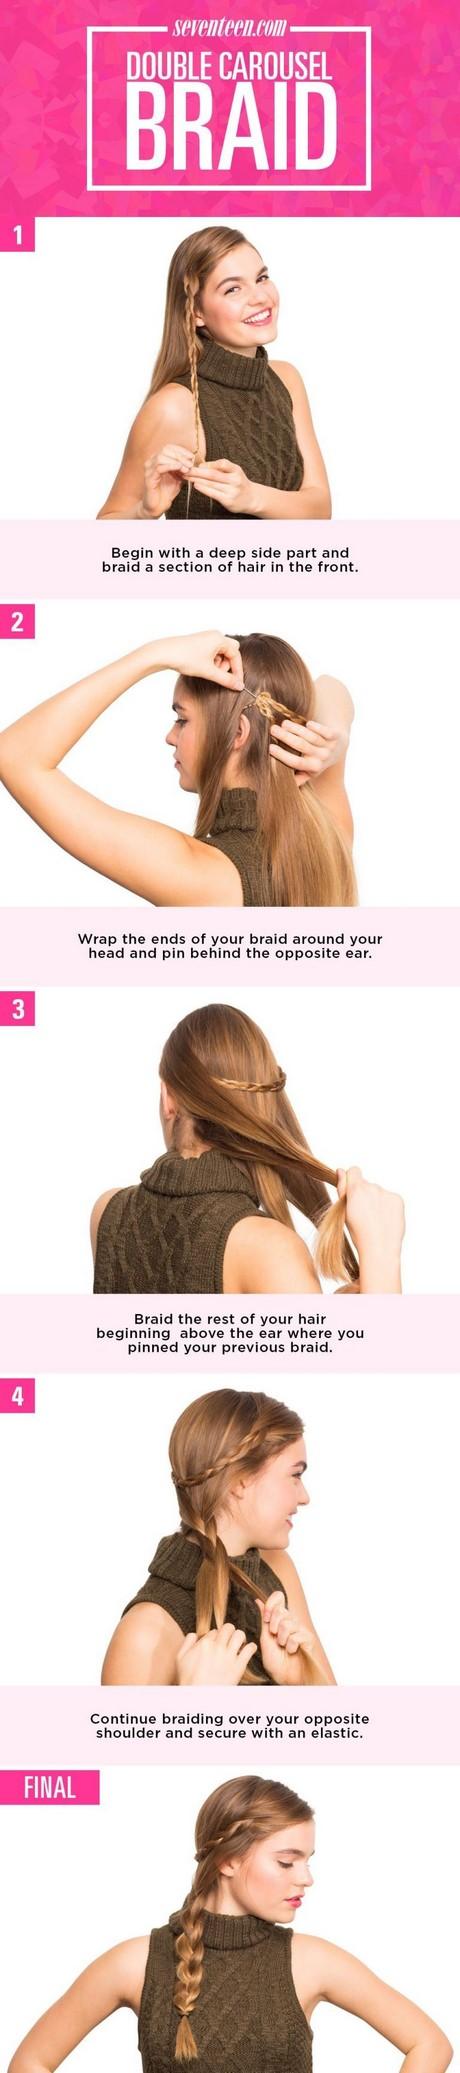 Where to get your hair braided where-to-get-your-hair-braided-15_13